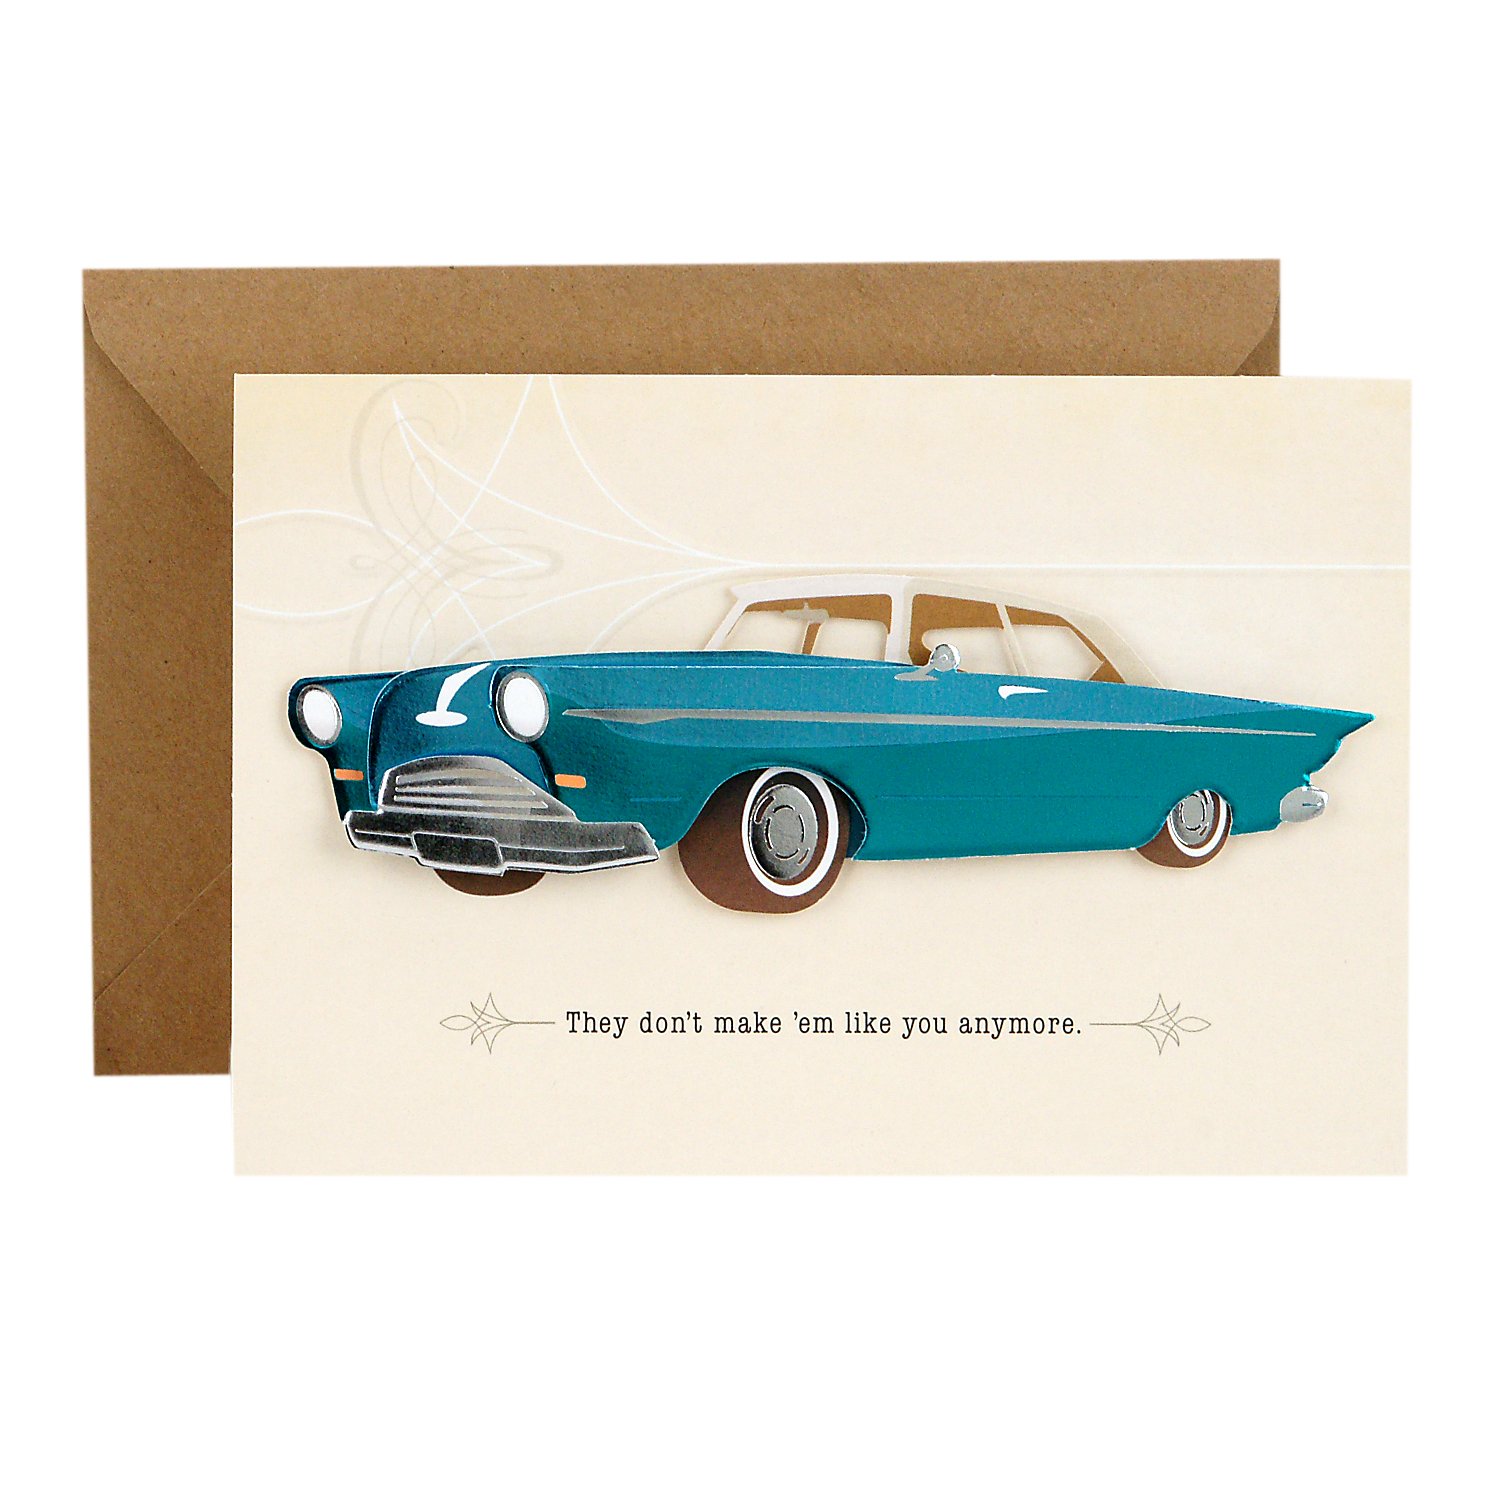 Hallmark Signature Father's Day Card (Vintage Classic Car, Don't Make 'Em Like You Anymore), (599FFW9632)